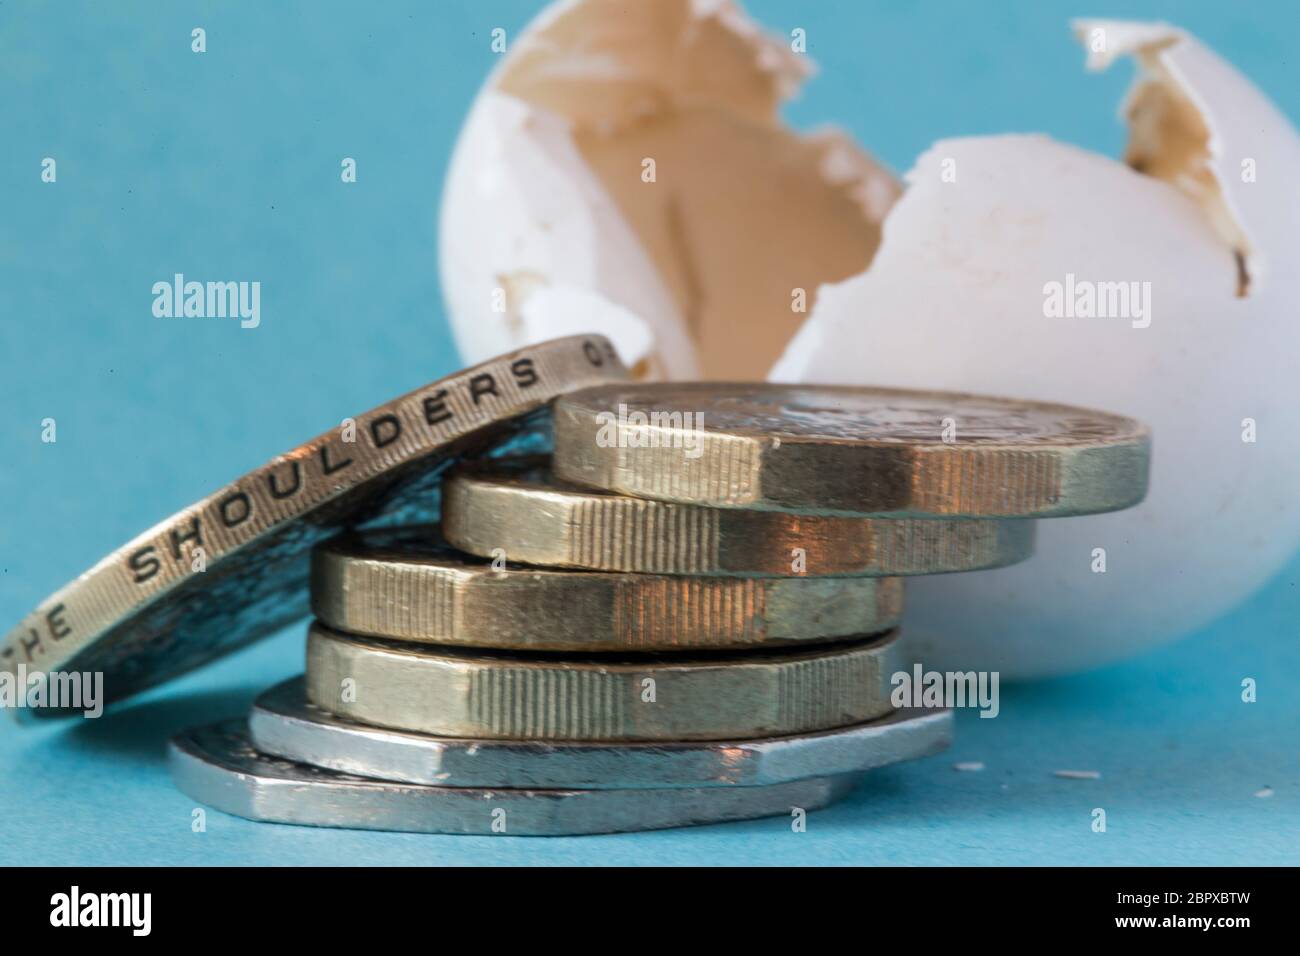 Ethically sourced wild bird's egg shell shot close up with British Pound Coins, a Two pound coin and some 50 pence pieces. Stock Photo